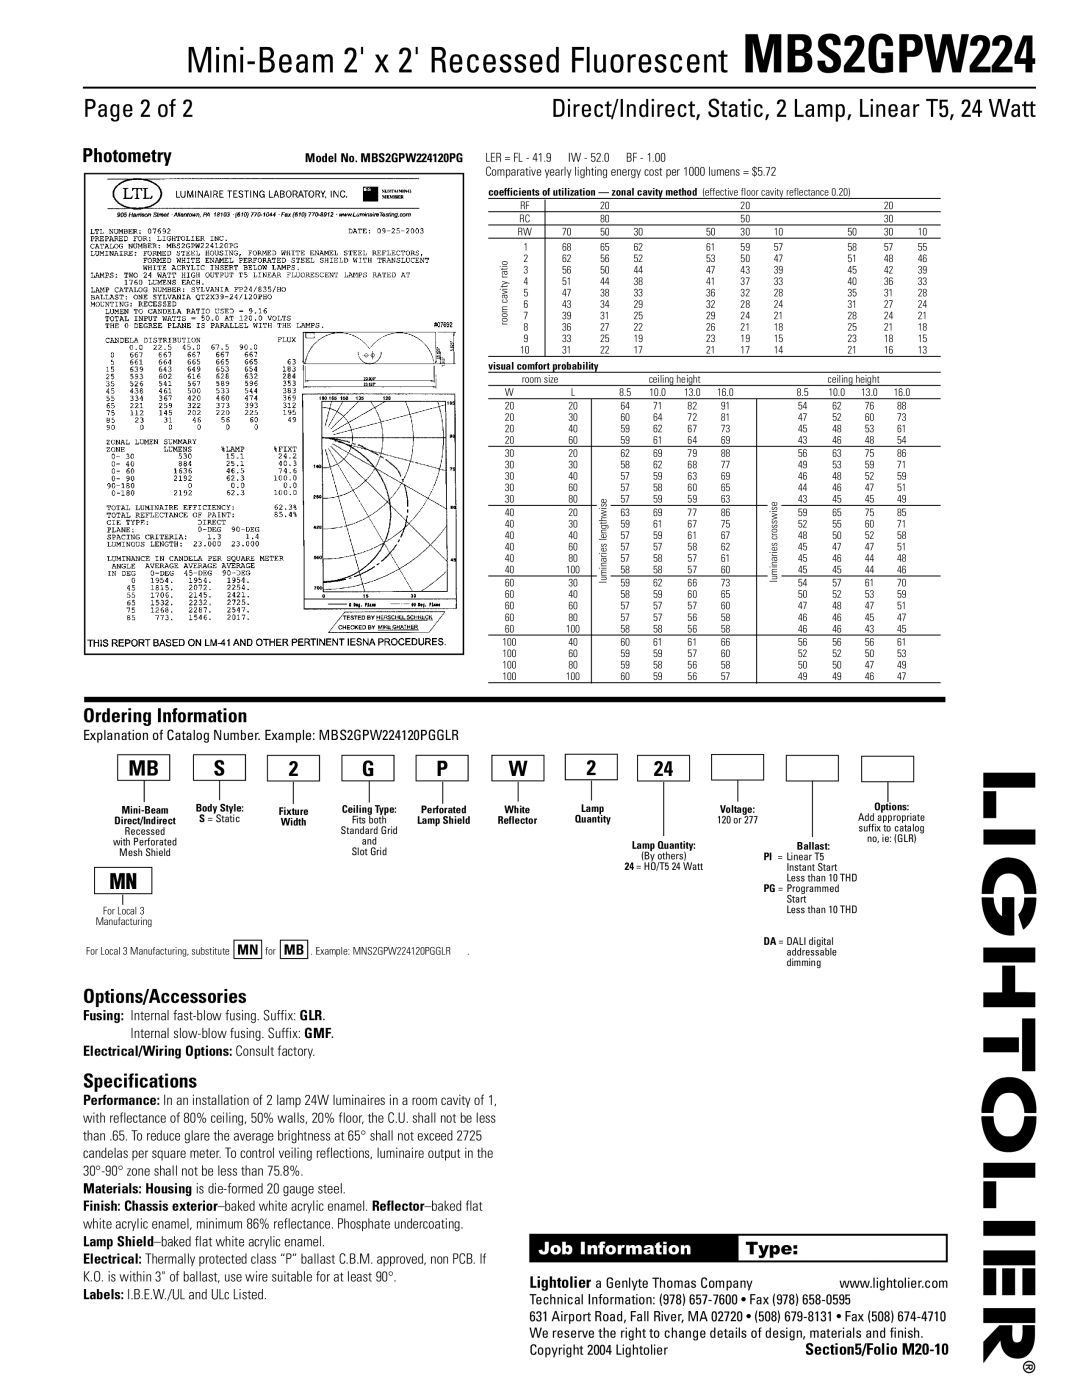 Lightolier MBS2GPW224 Page 2 of, Photometry, Ordering Information, Options/Accessories, Specifications, Job Information 